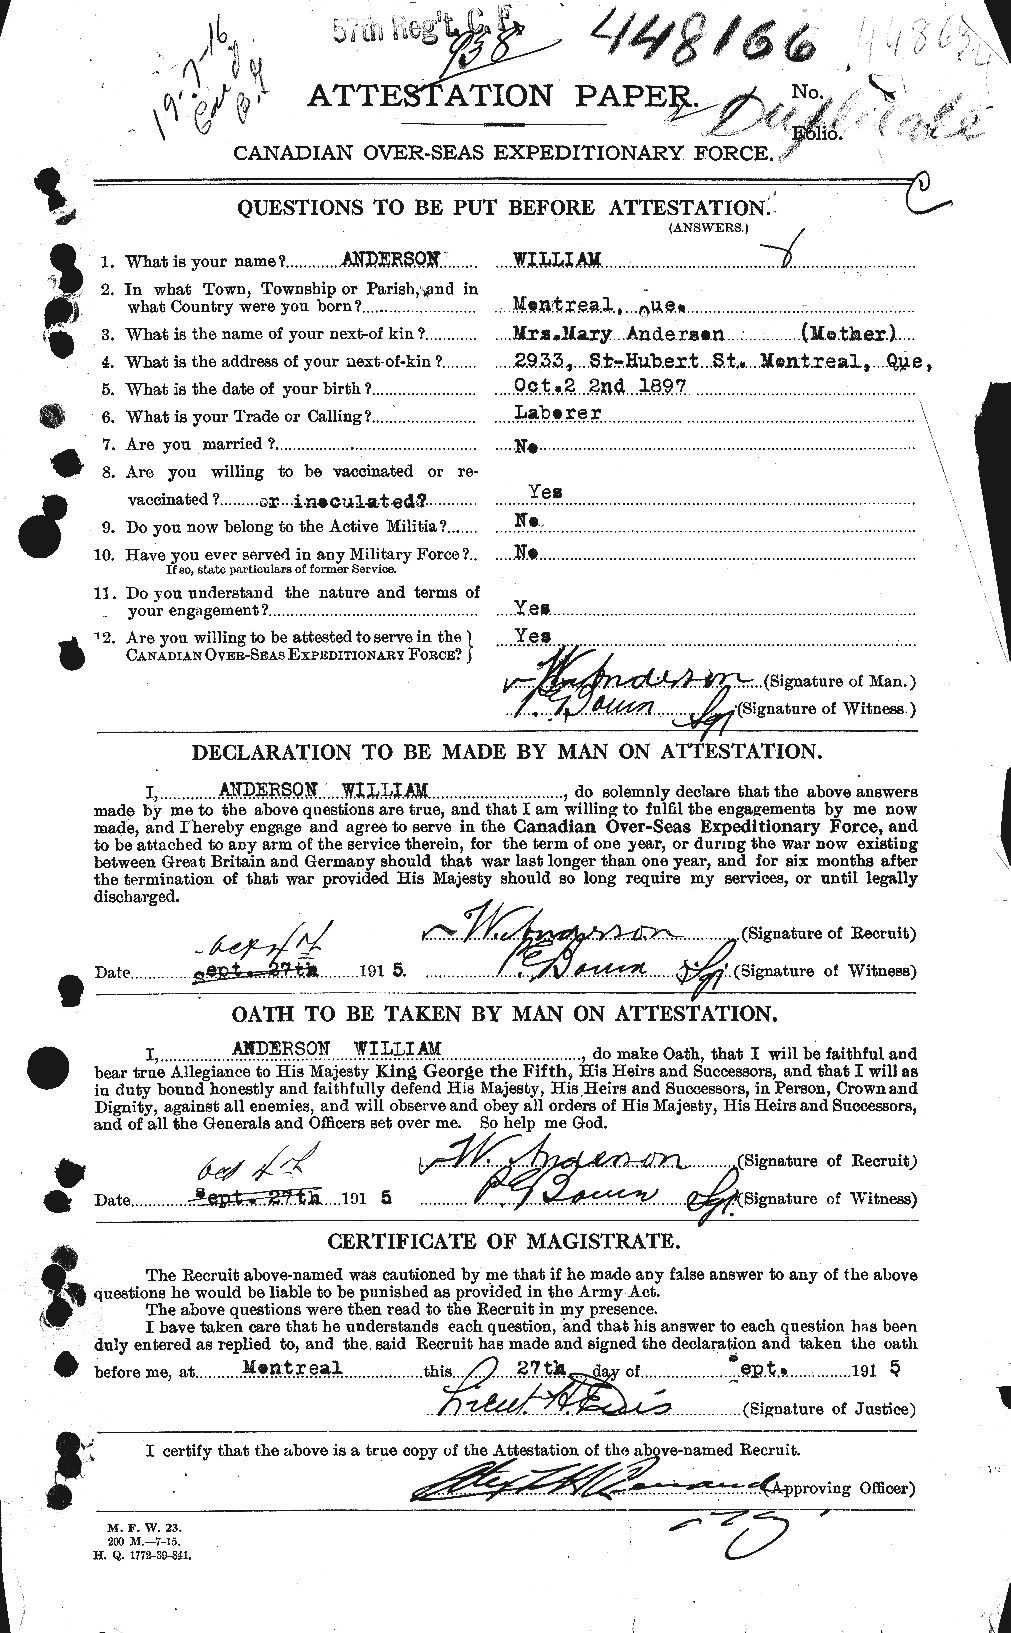 Personnel Records of the First World War - CEF 210759a